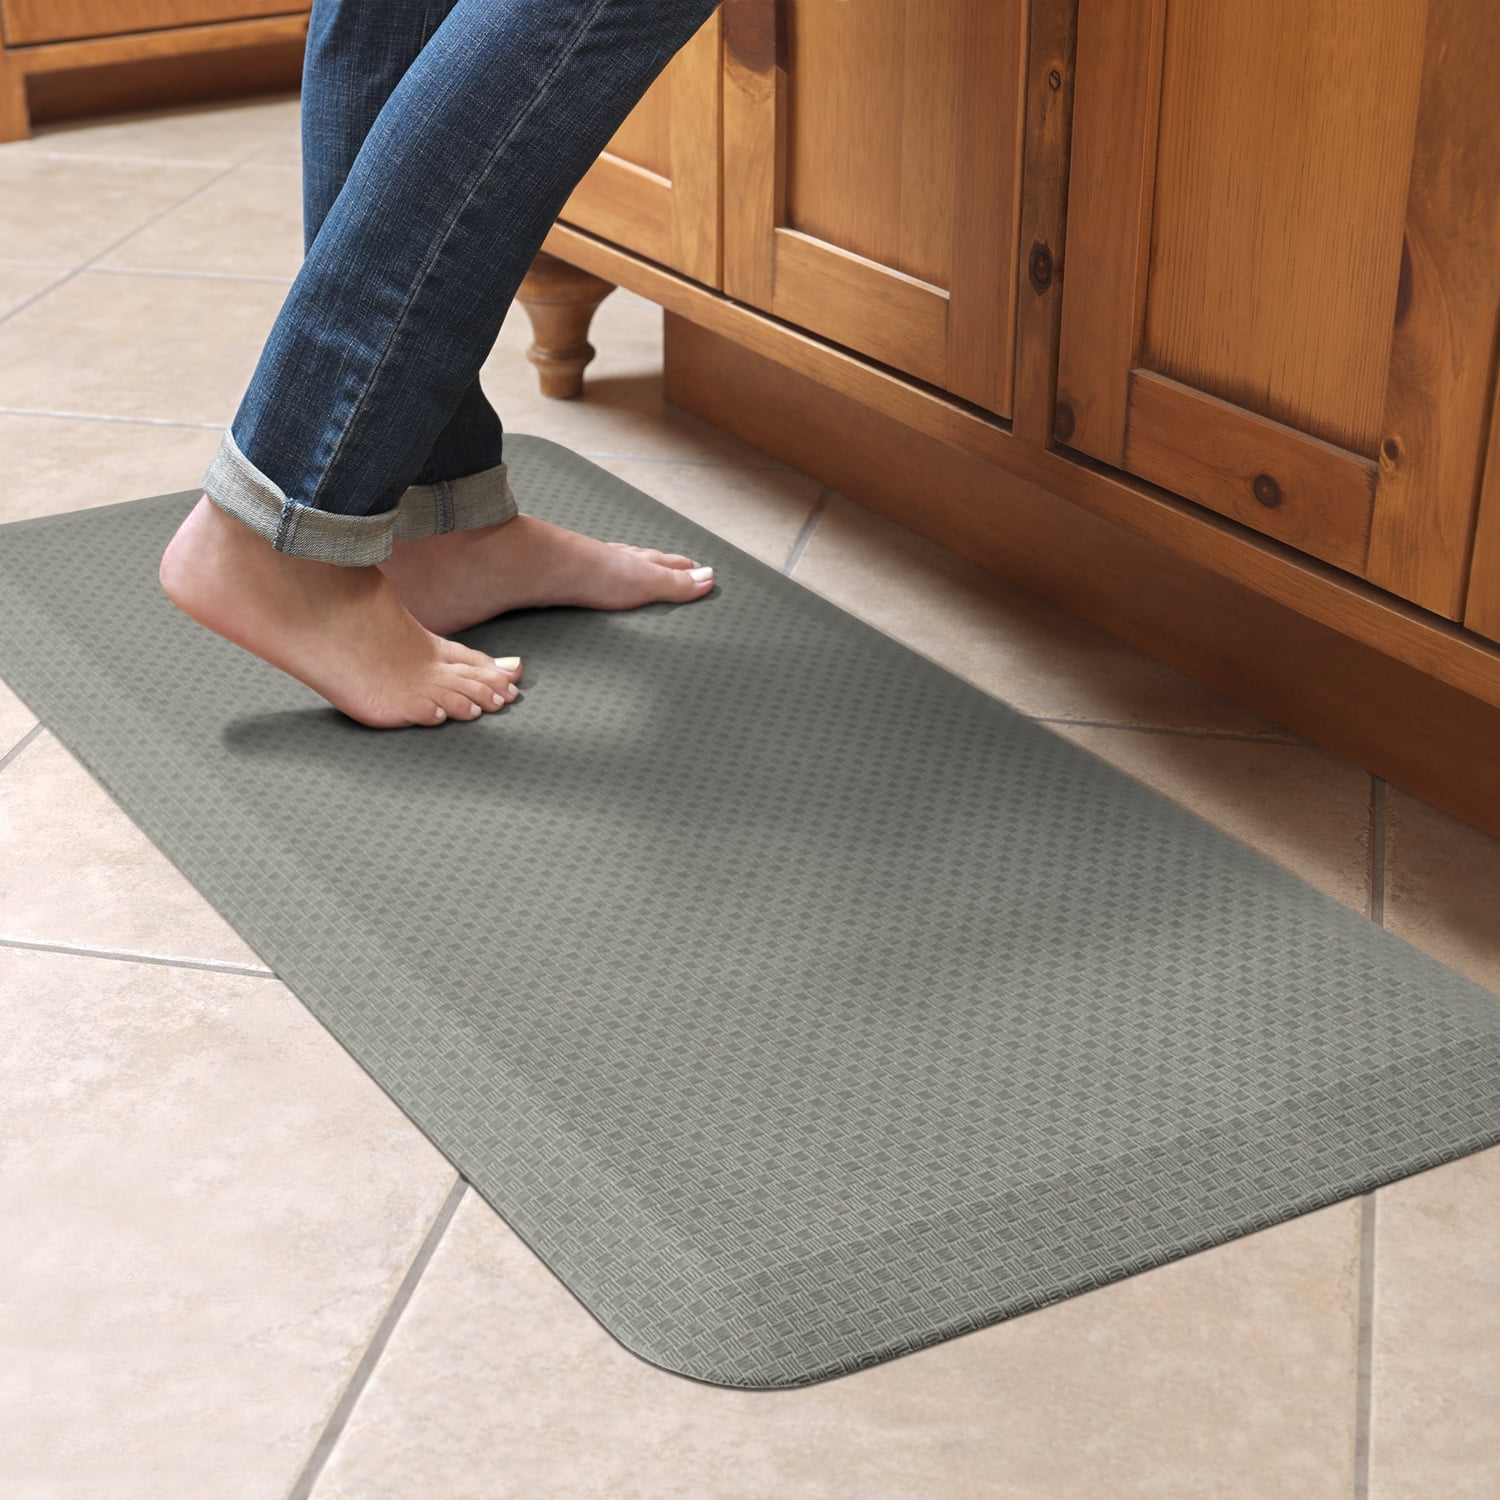 Newlife by GelPro Anti-fatigue Comfort Mat 20x48 Grasscloth Charcoal for sale online 